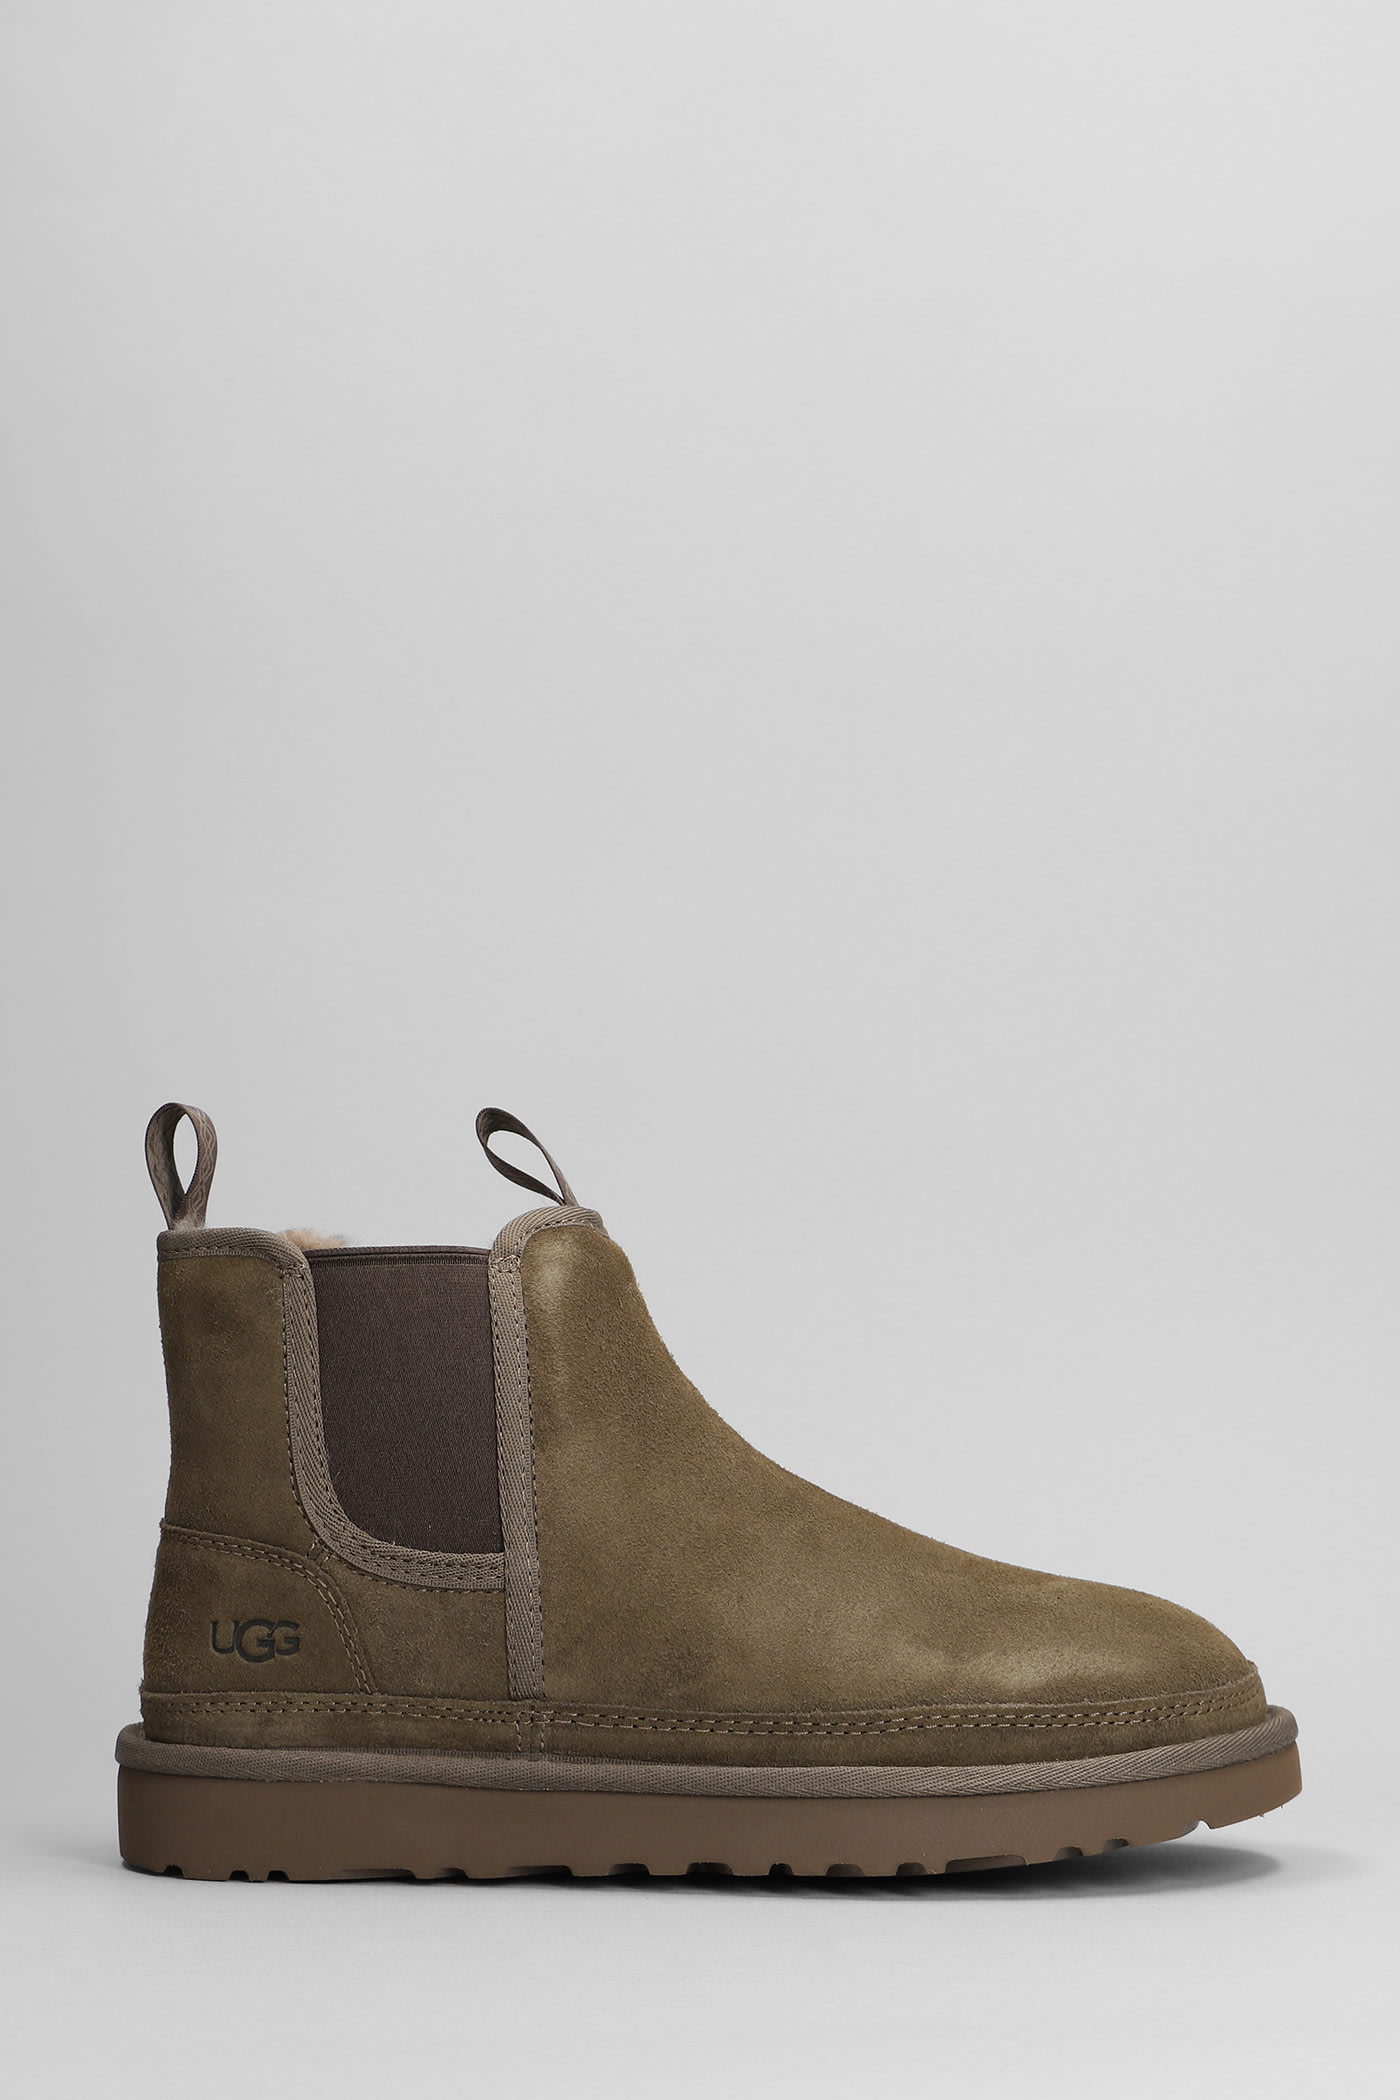 Ugg Neumel Chelsea Low Heels Ankle Boots In Taupe Suede